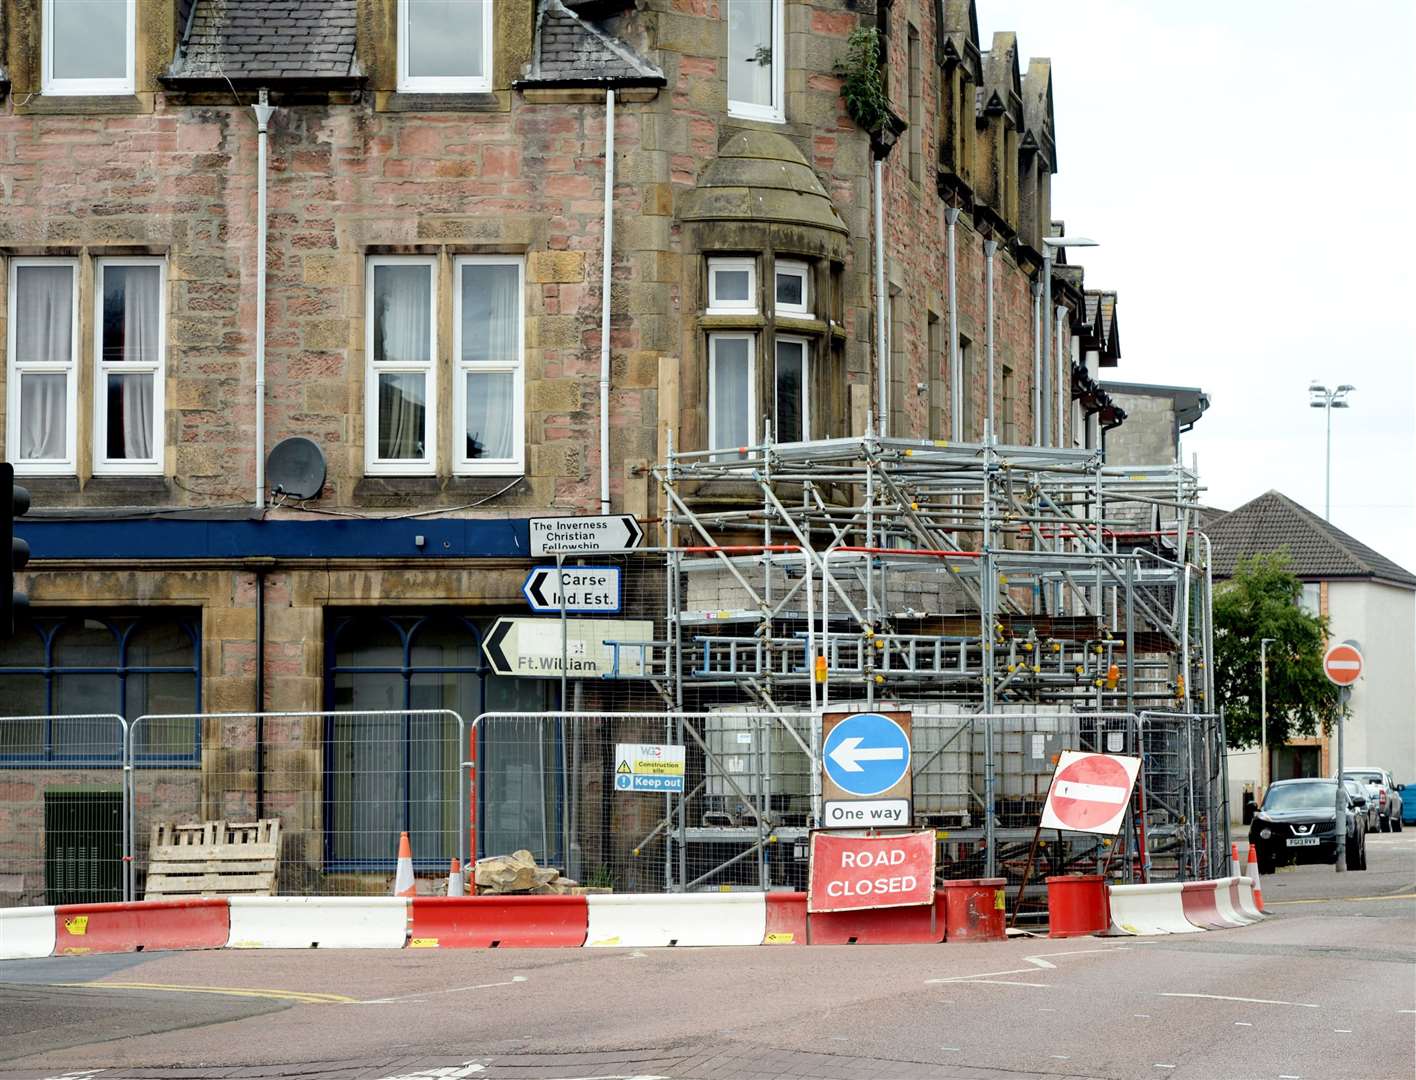 The damaged building in Merkinch.